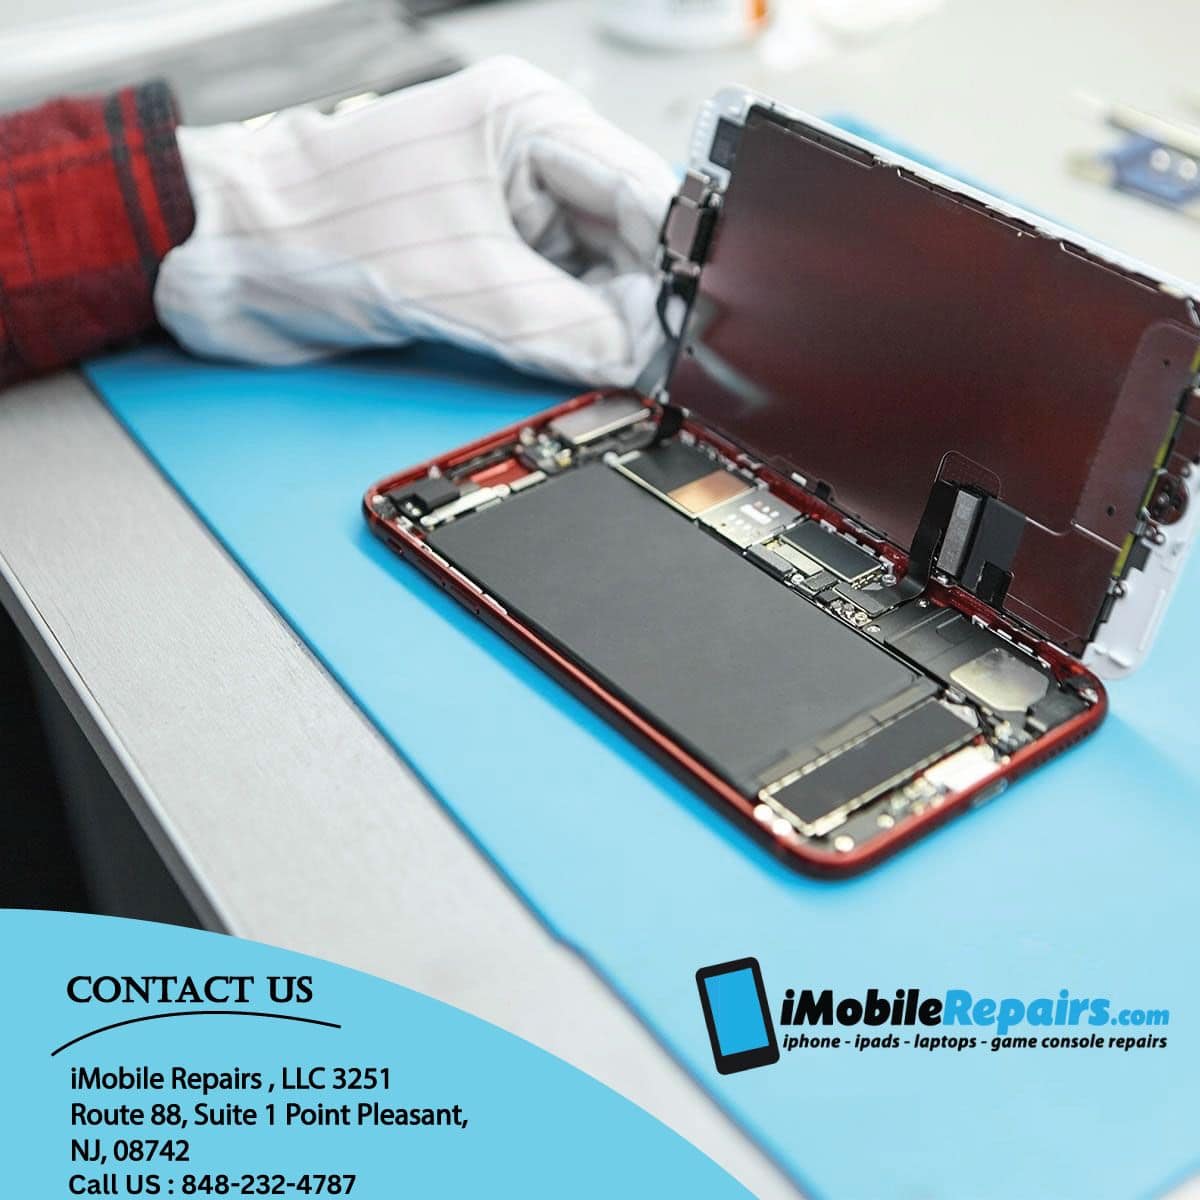 iMobile Repairs - Point Pleasant, NJ, US, rendering a service